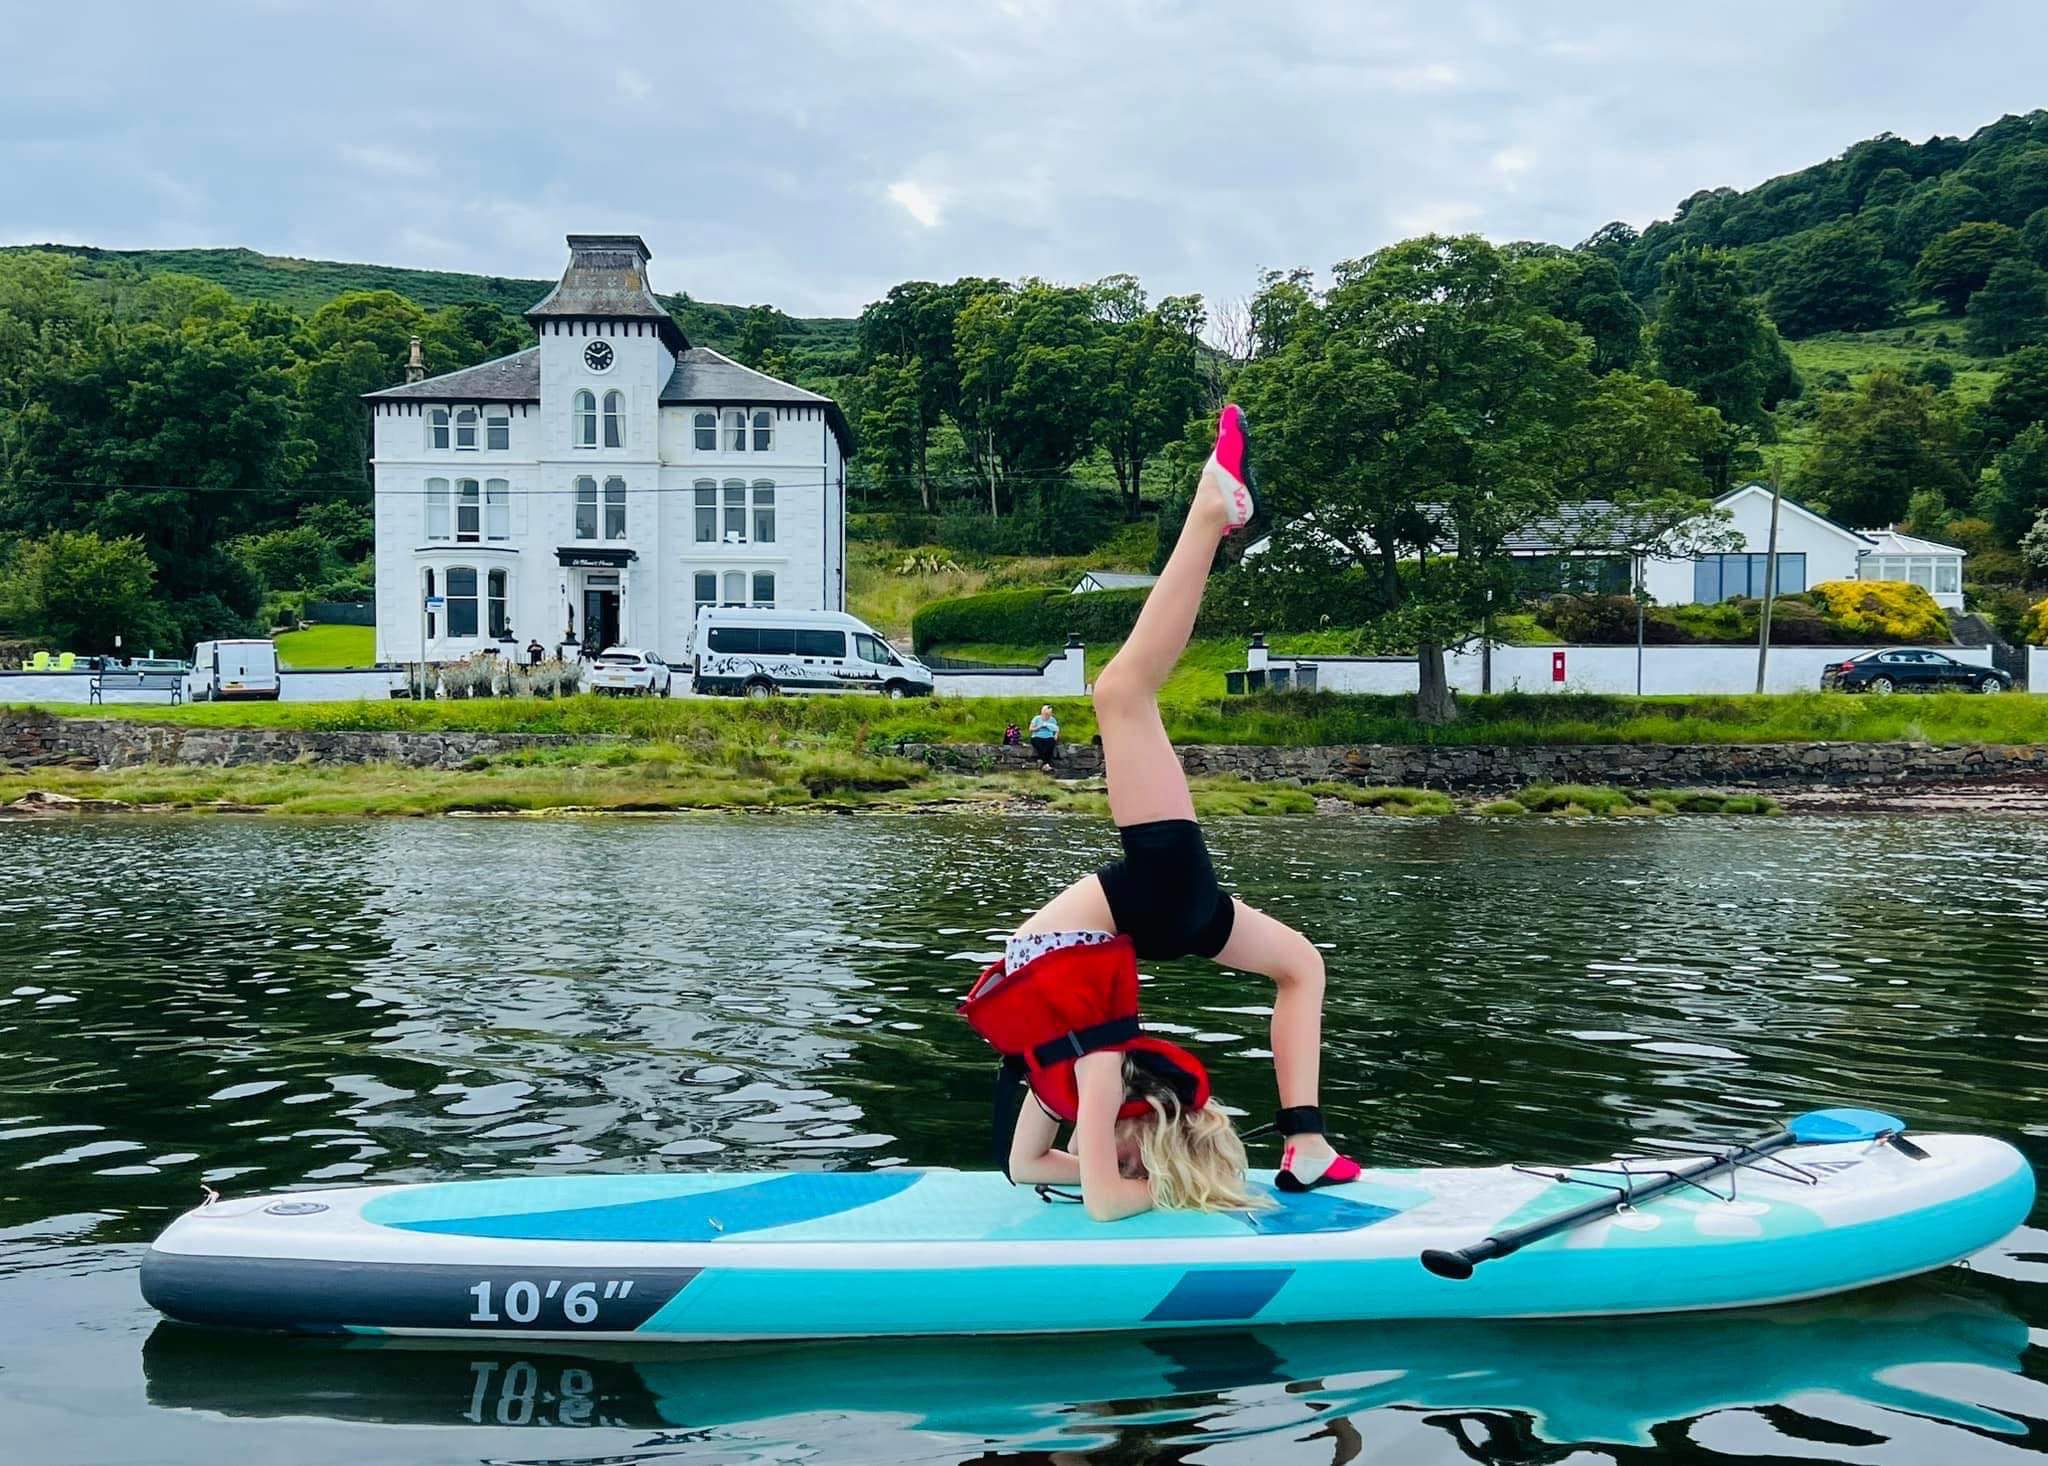 St Blane's - show your moves paddle boarding close to the holiday house